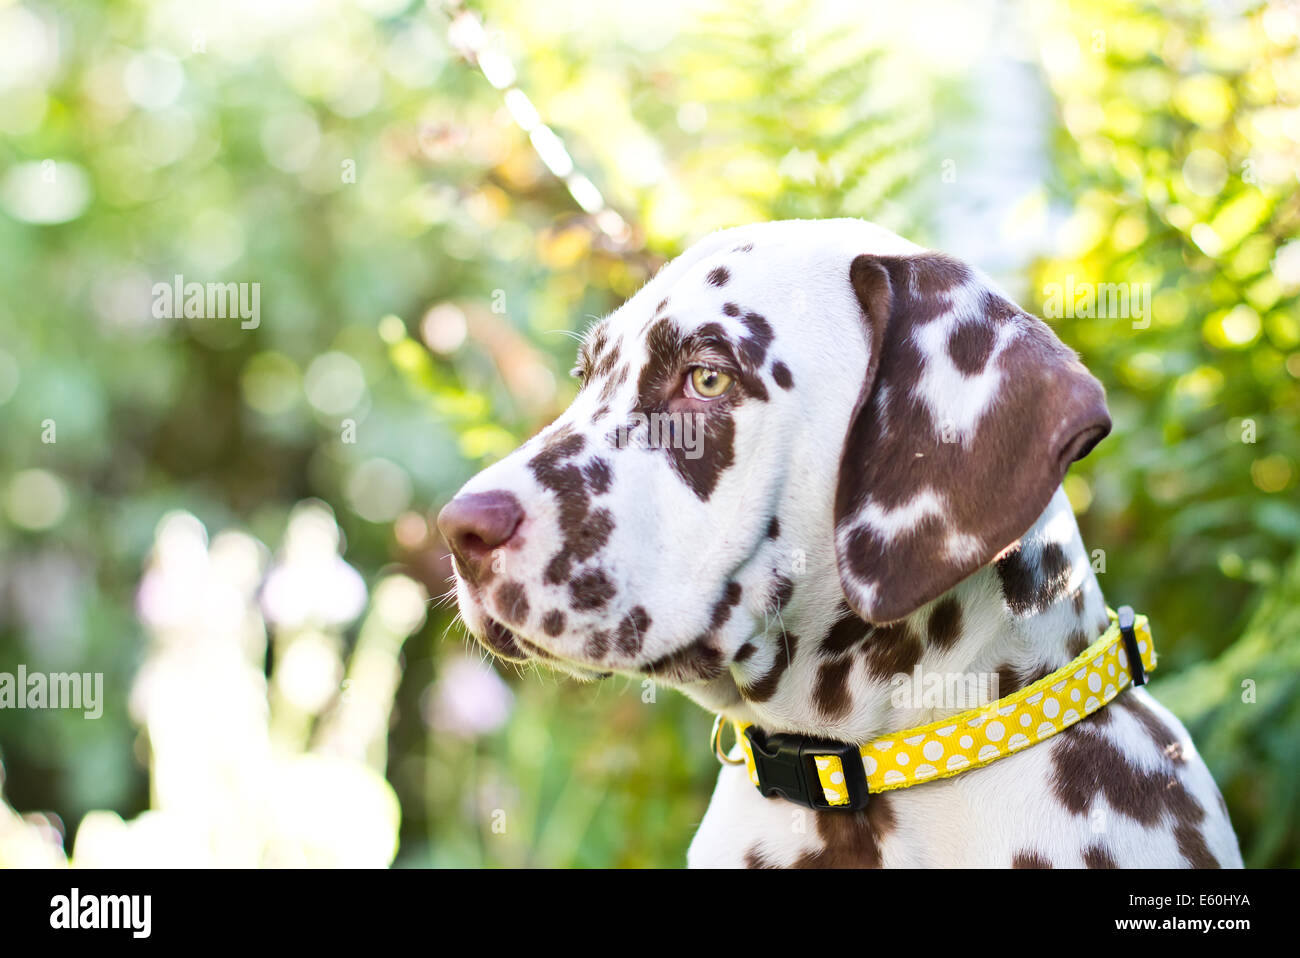 Dalmatian puppy outside in the countryside wearing a collar Stock Photo